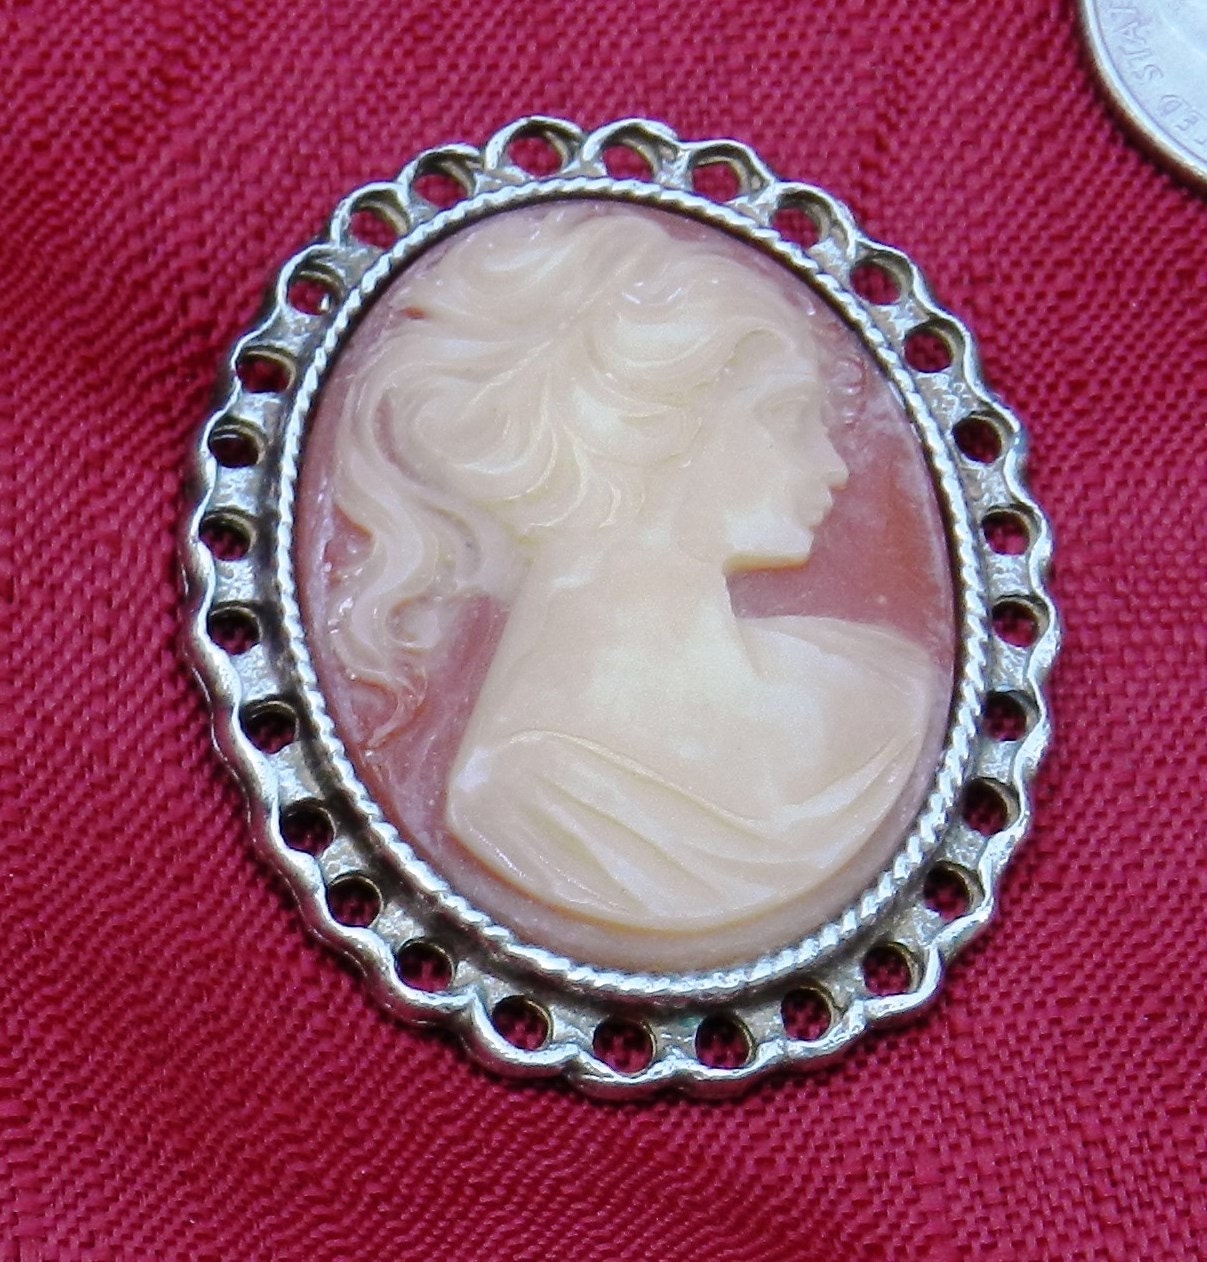 Vintage White on Pink Goldtone Cameo Pin/Brooch 2 by 1